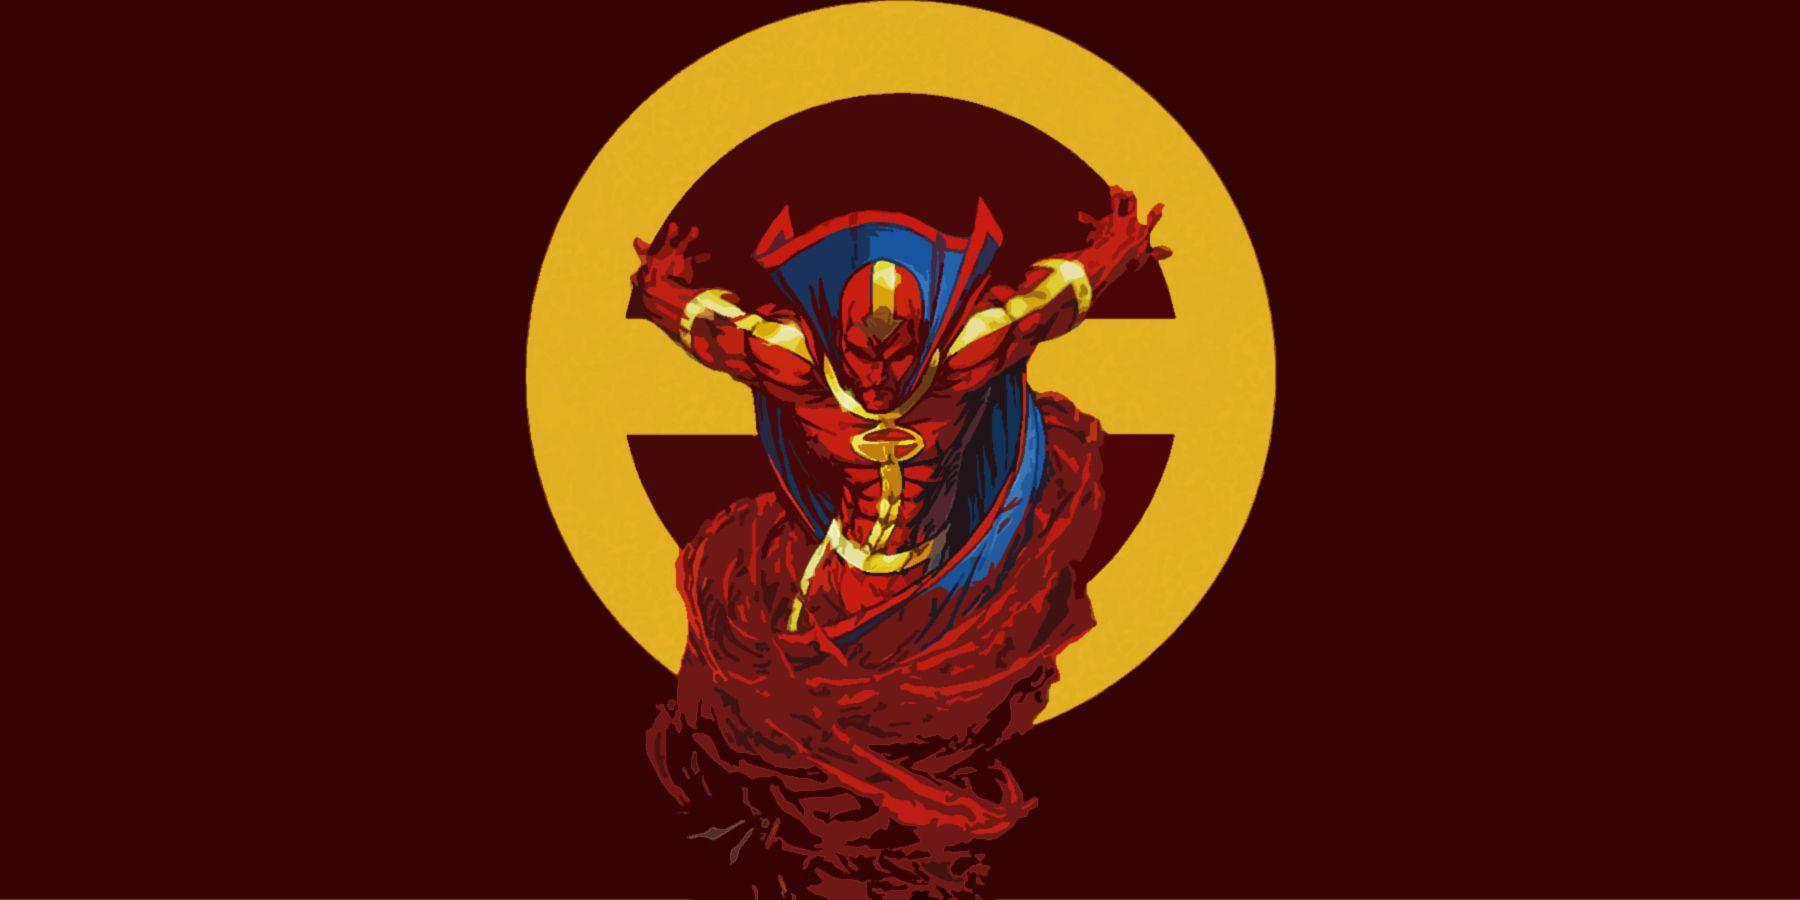 There really arent enough Red Tornado wallpapers